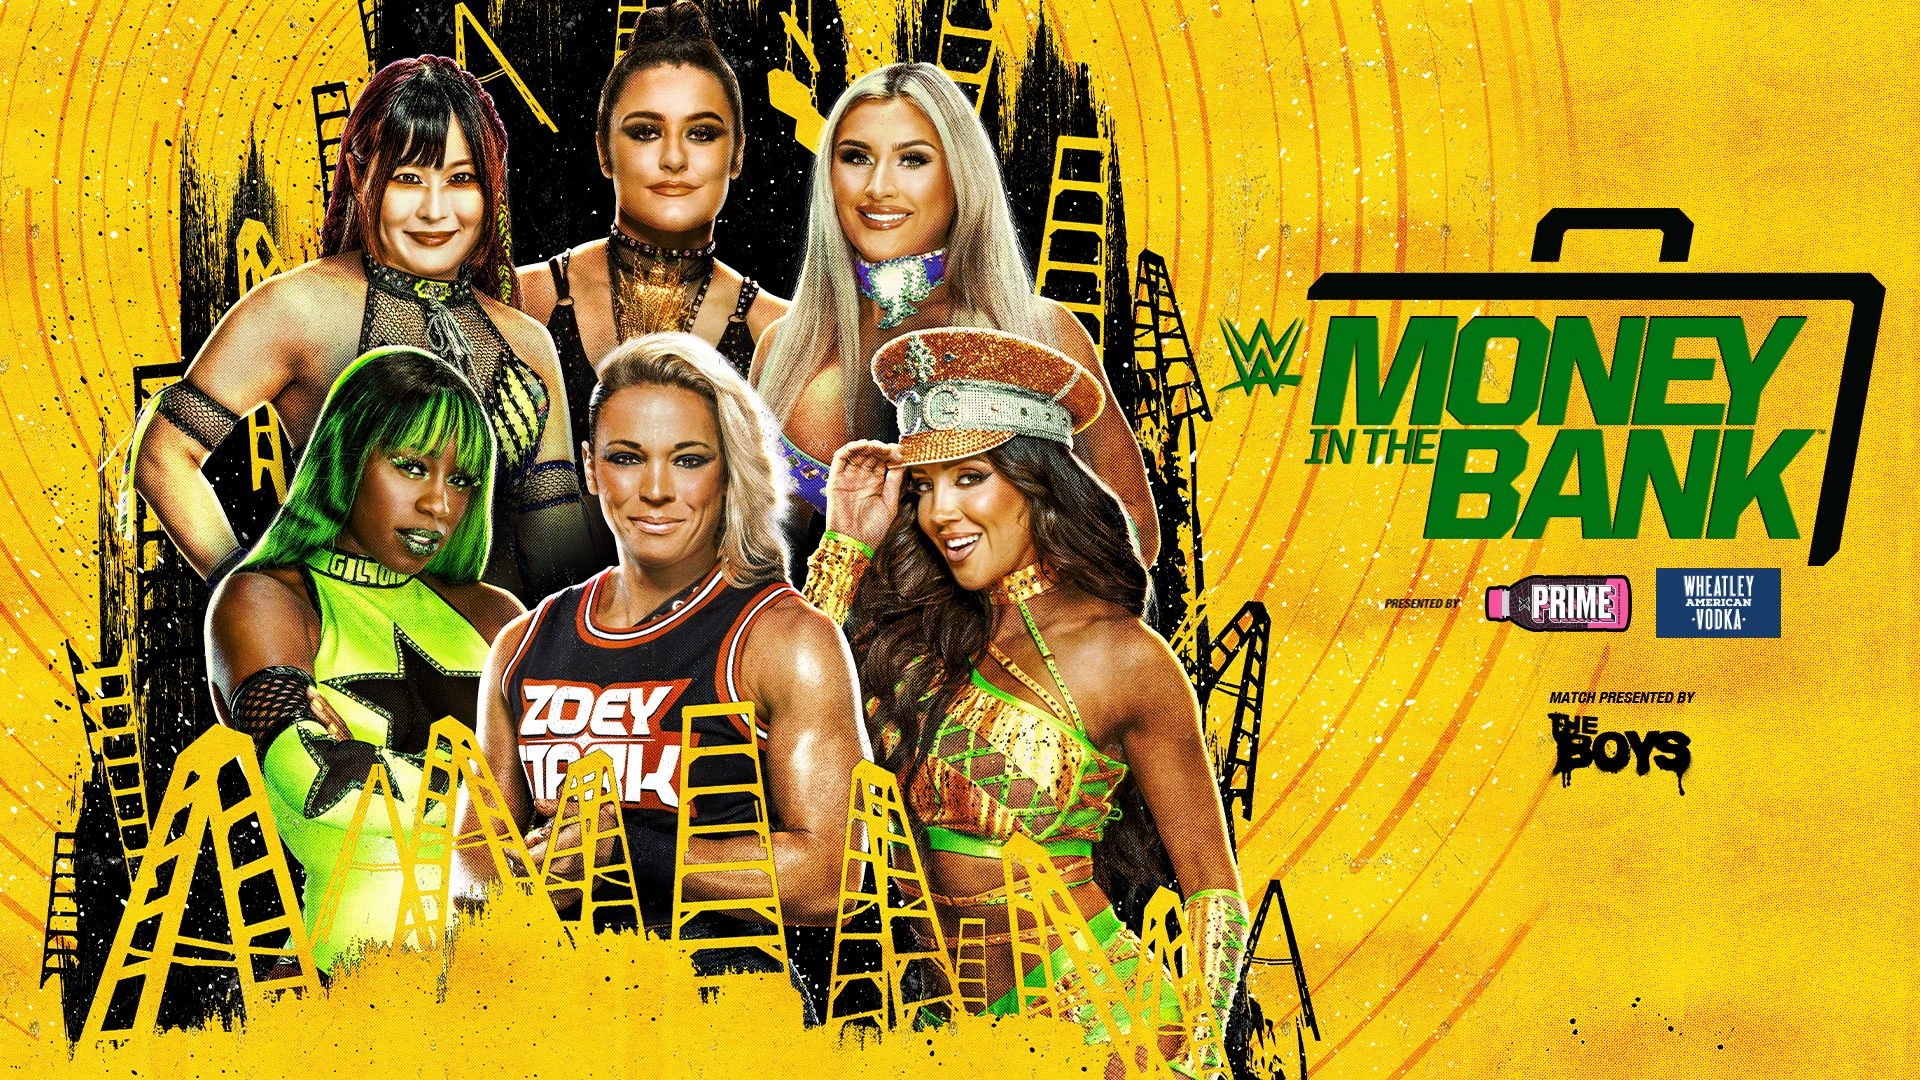 A chance at greatness awaits six Superstars in the Women's Money in the Bank Ladder Match